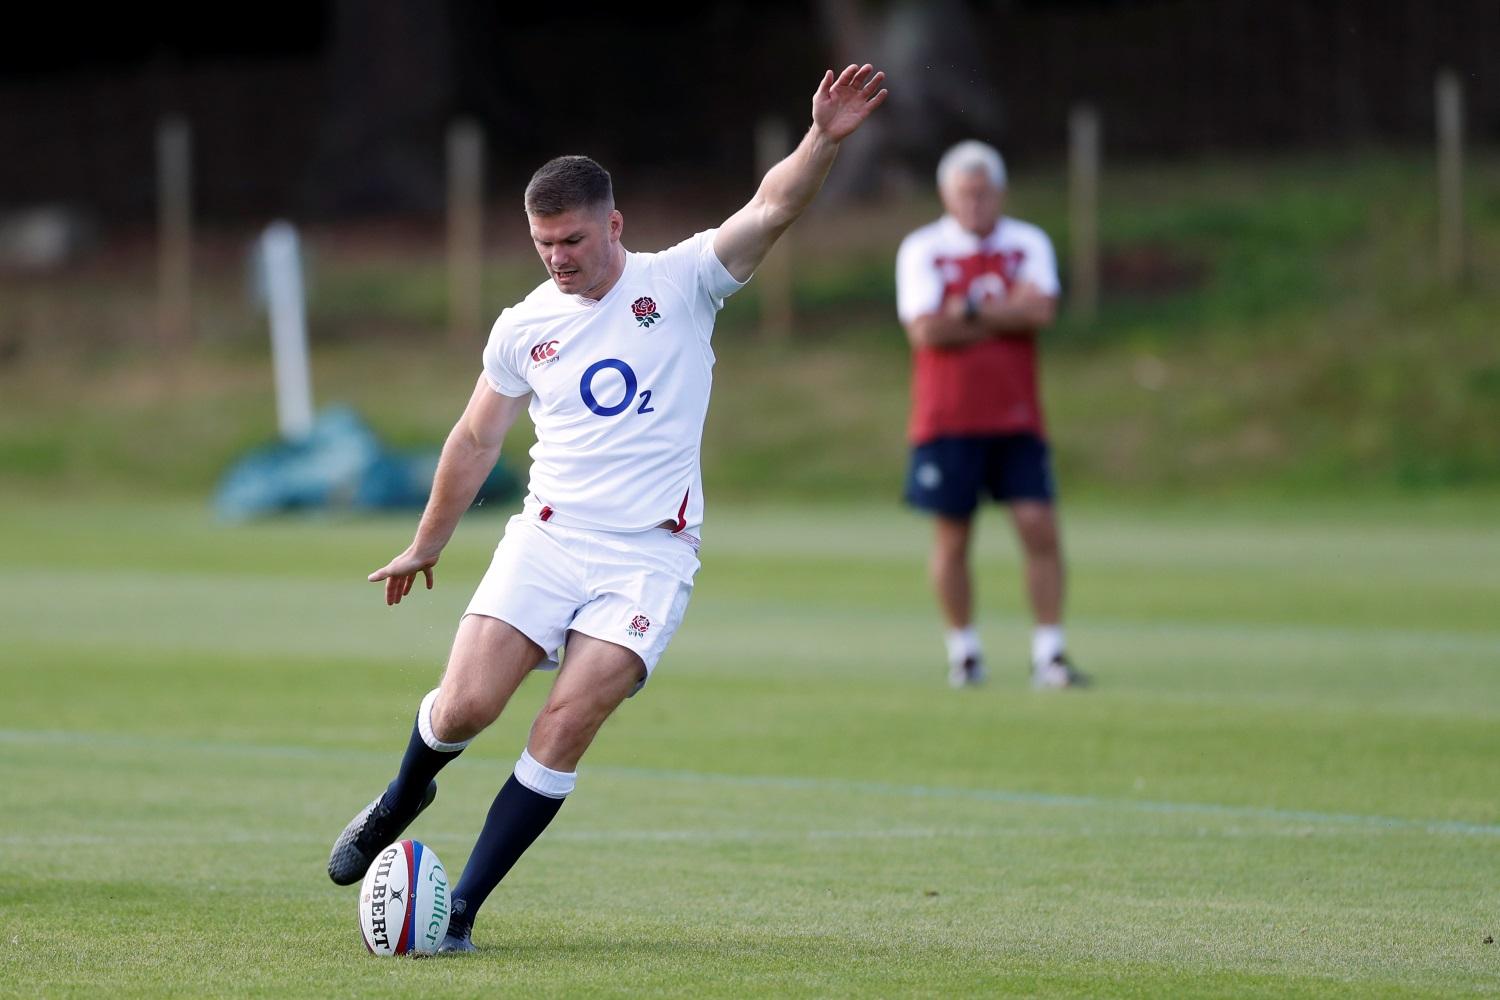 England Yet To Hit Top Form – Farrell